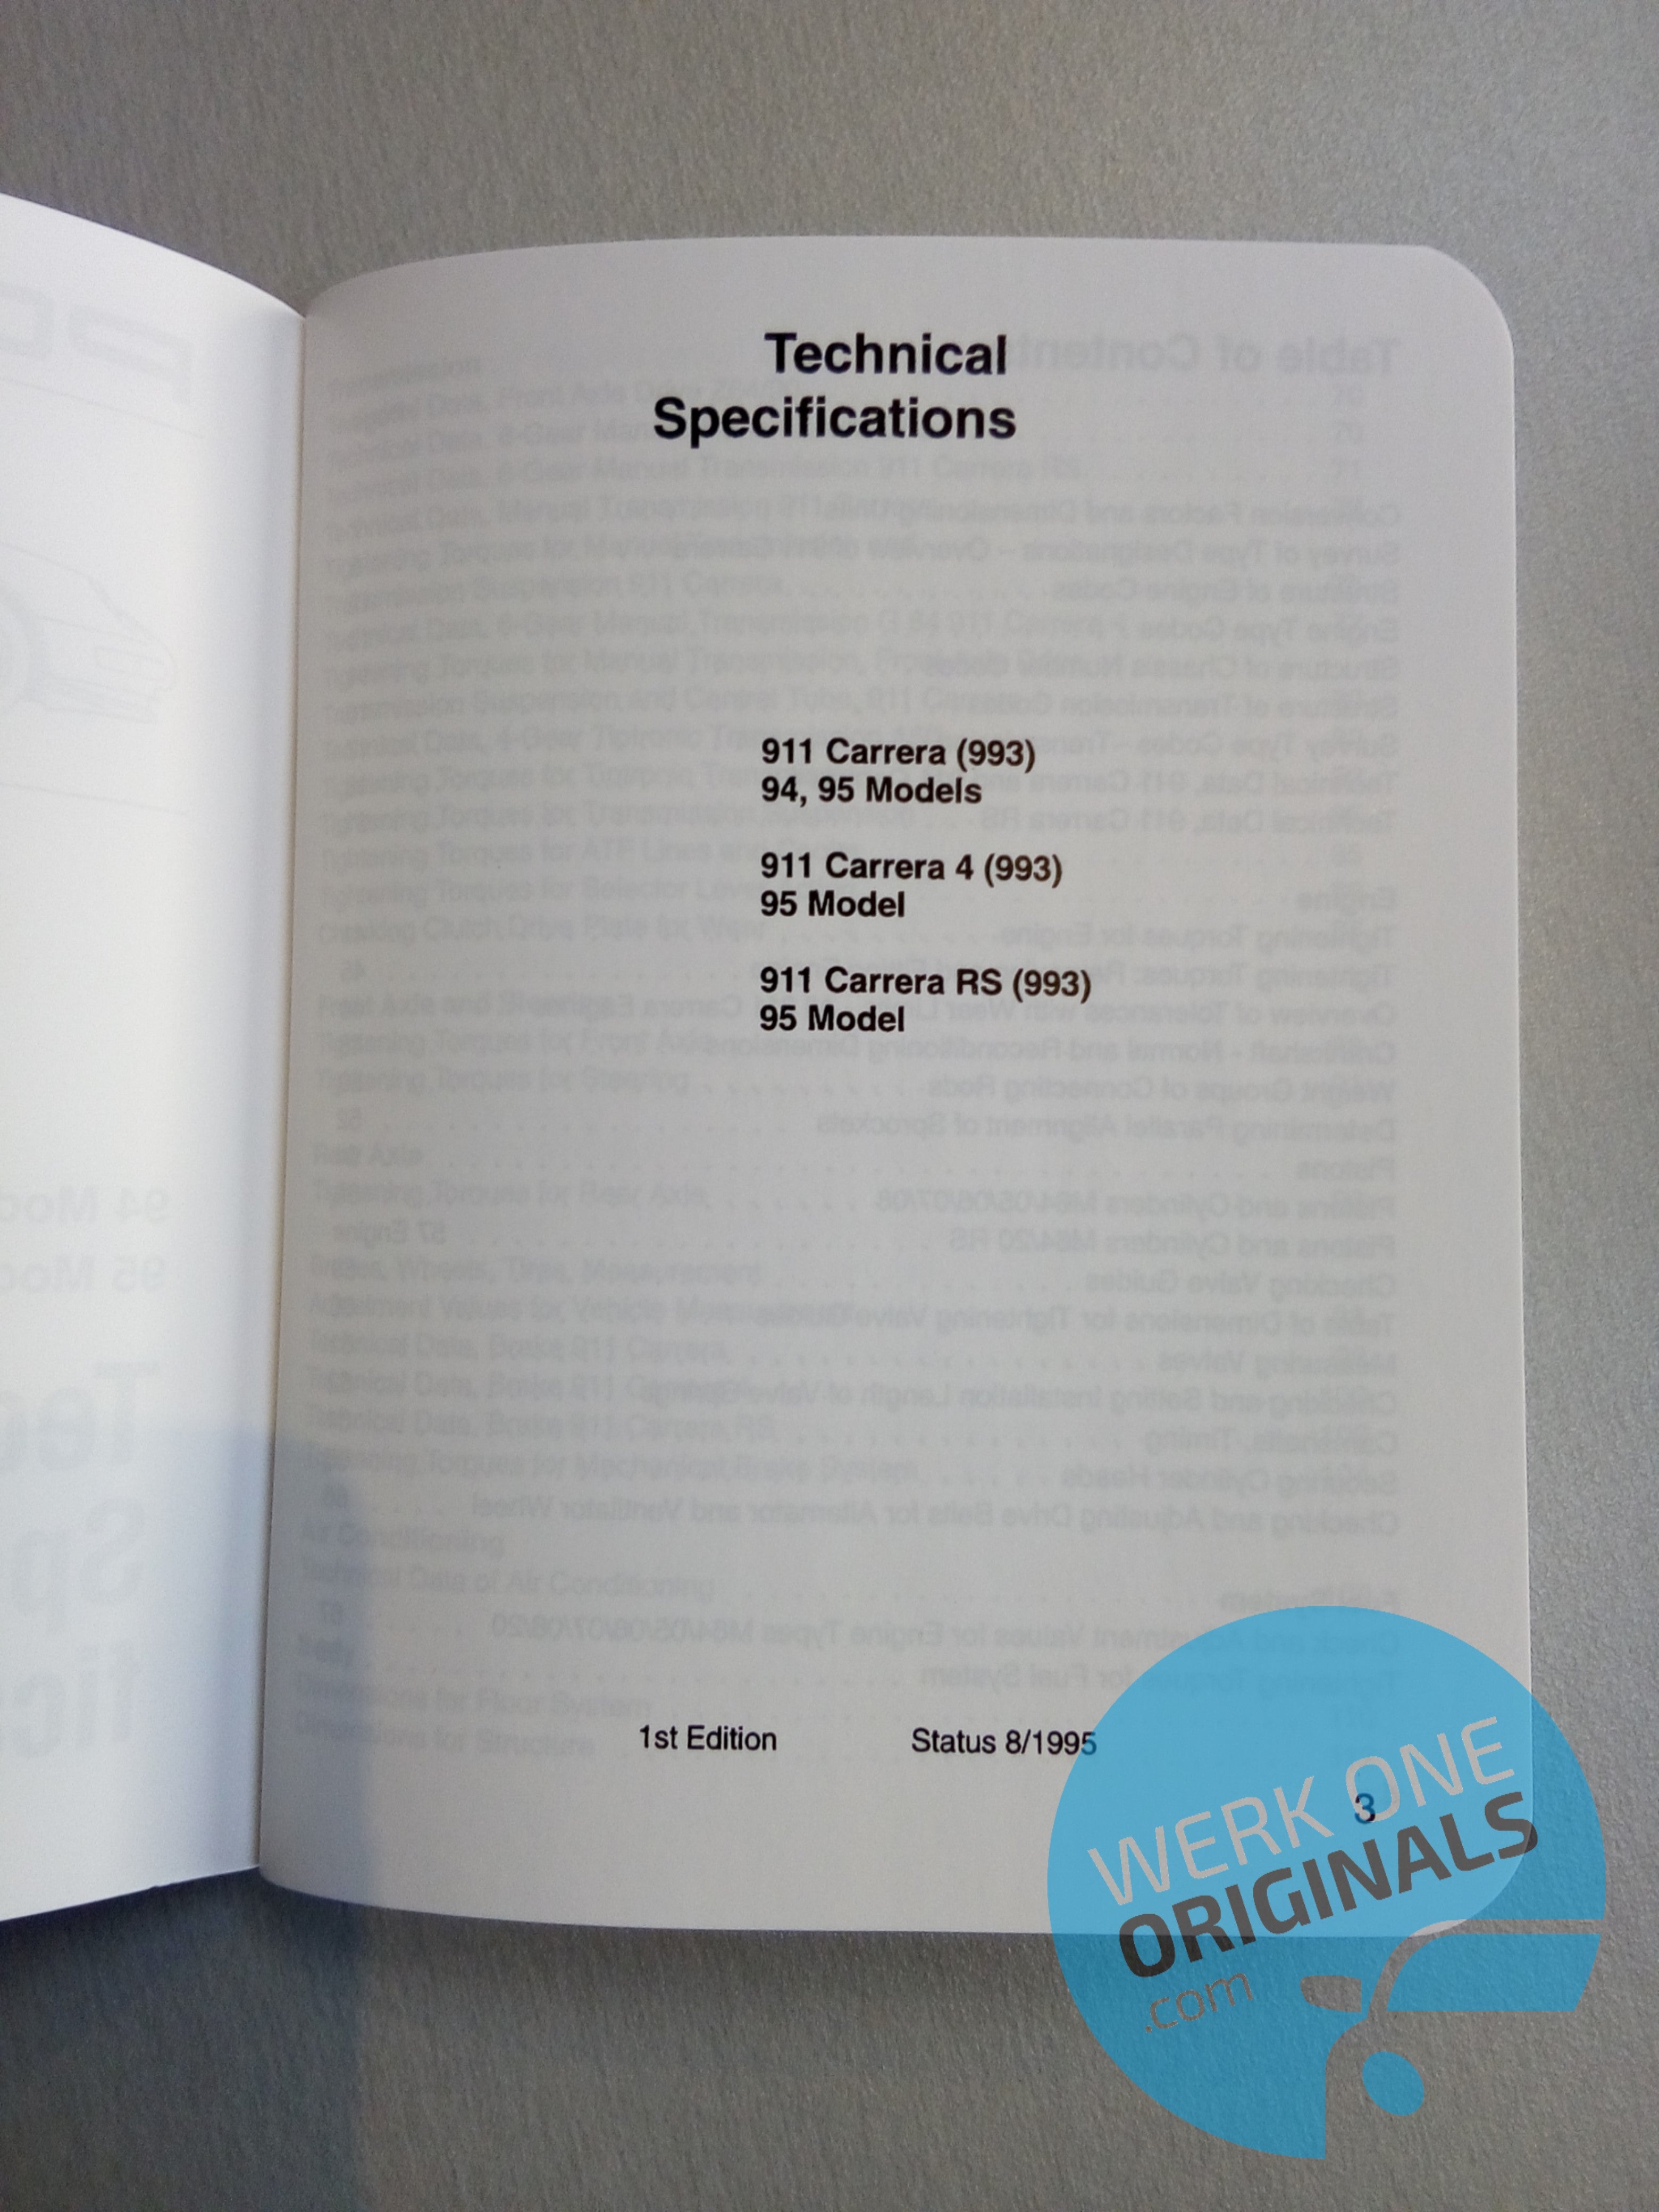 Porsche Technical Specification Manual for 911 Type 993 Models!